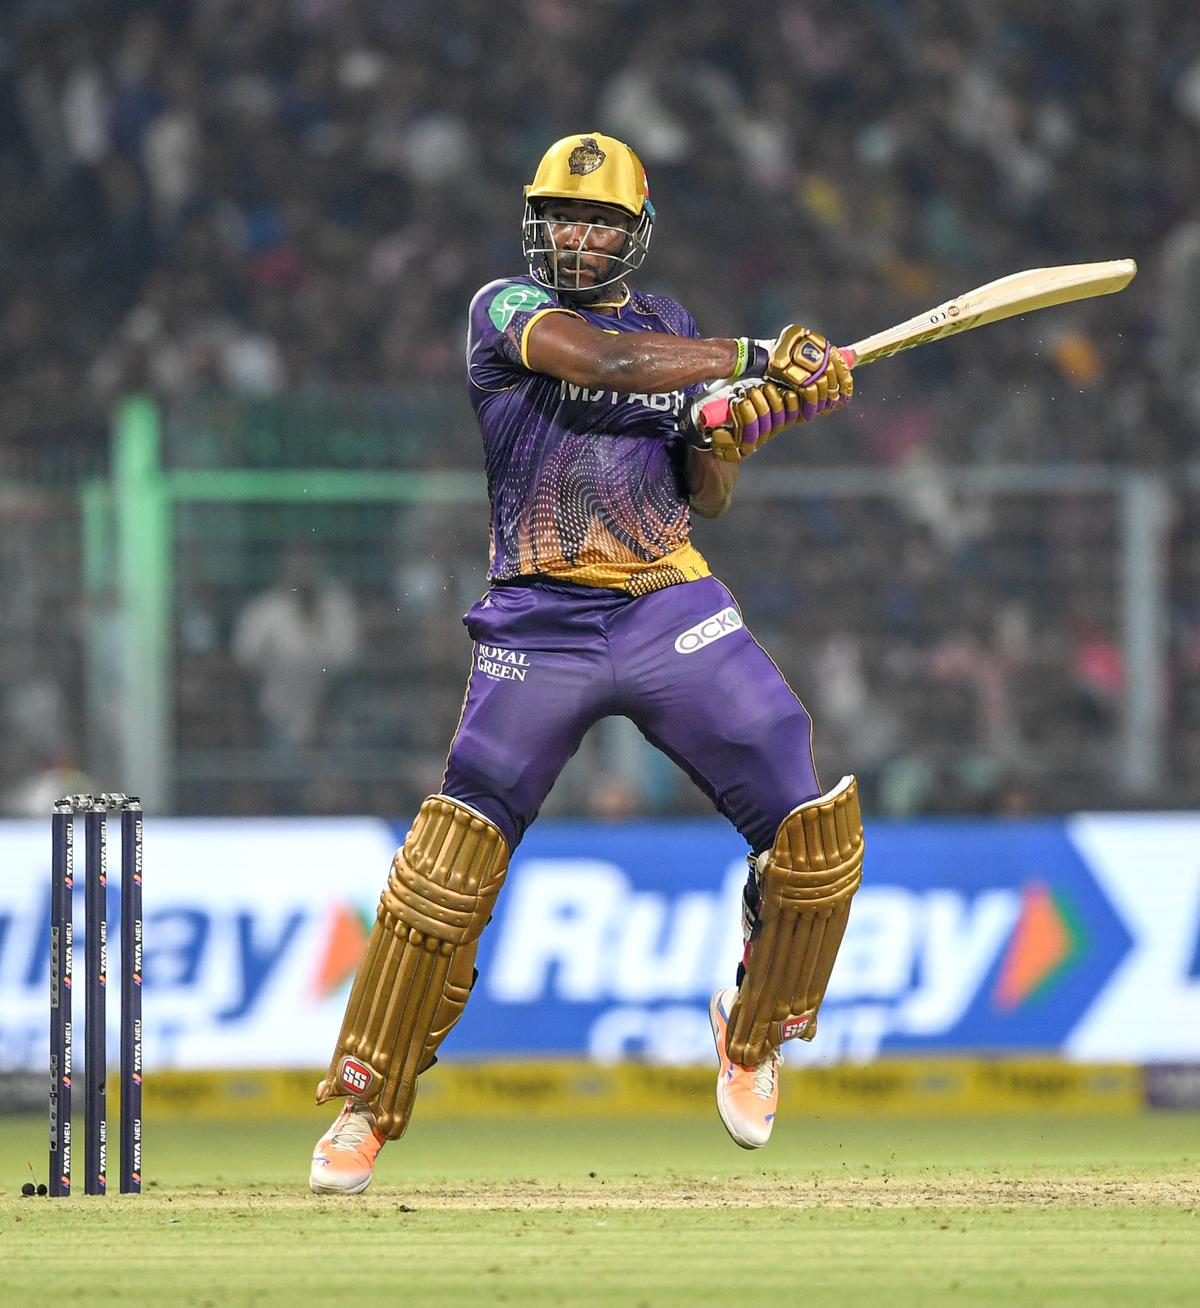 Standing tall: Andre Russell made a great return to form with a whirlwind 42 off 23 balls, setting the stage for KKR’s five-wicket win.